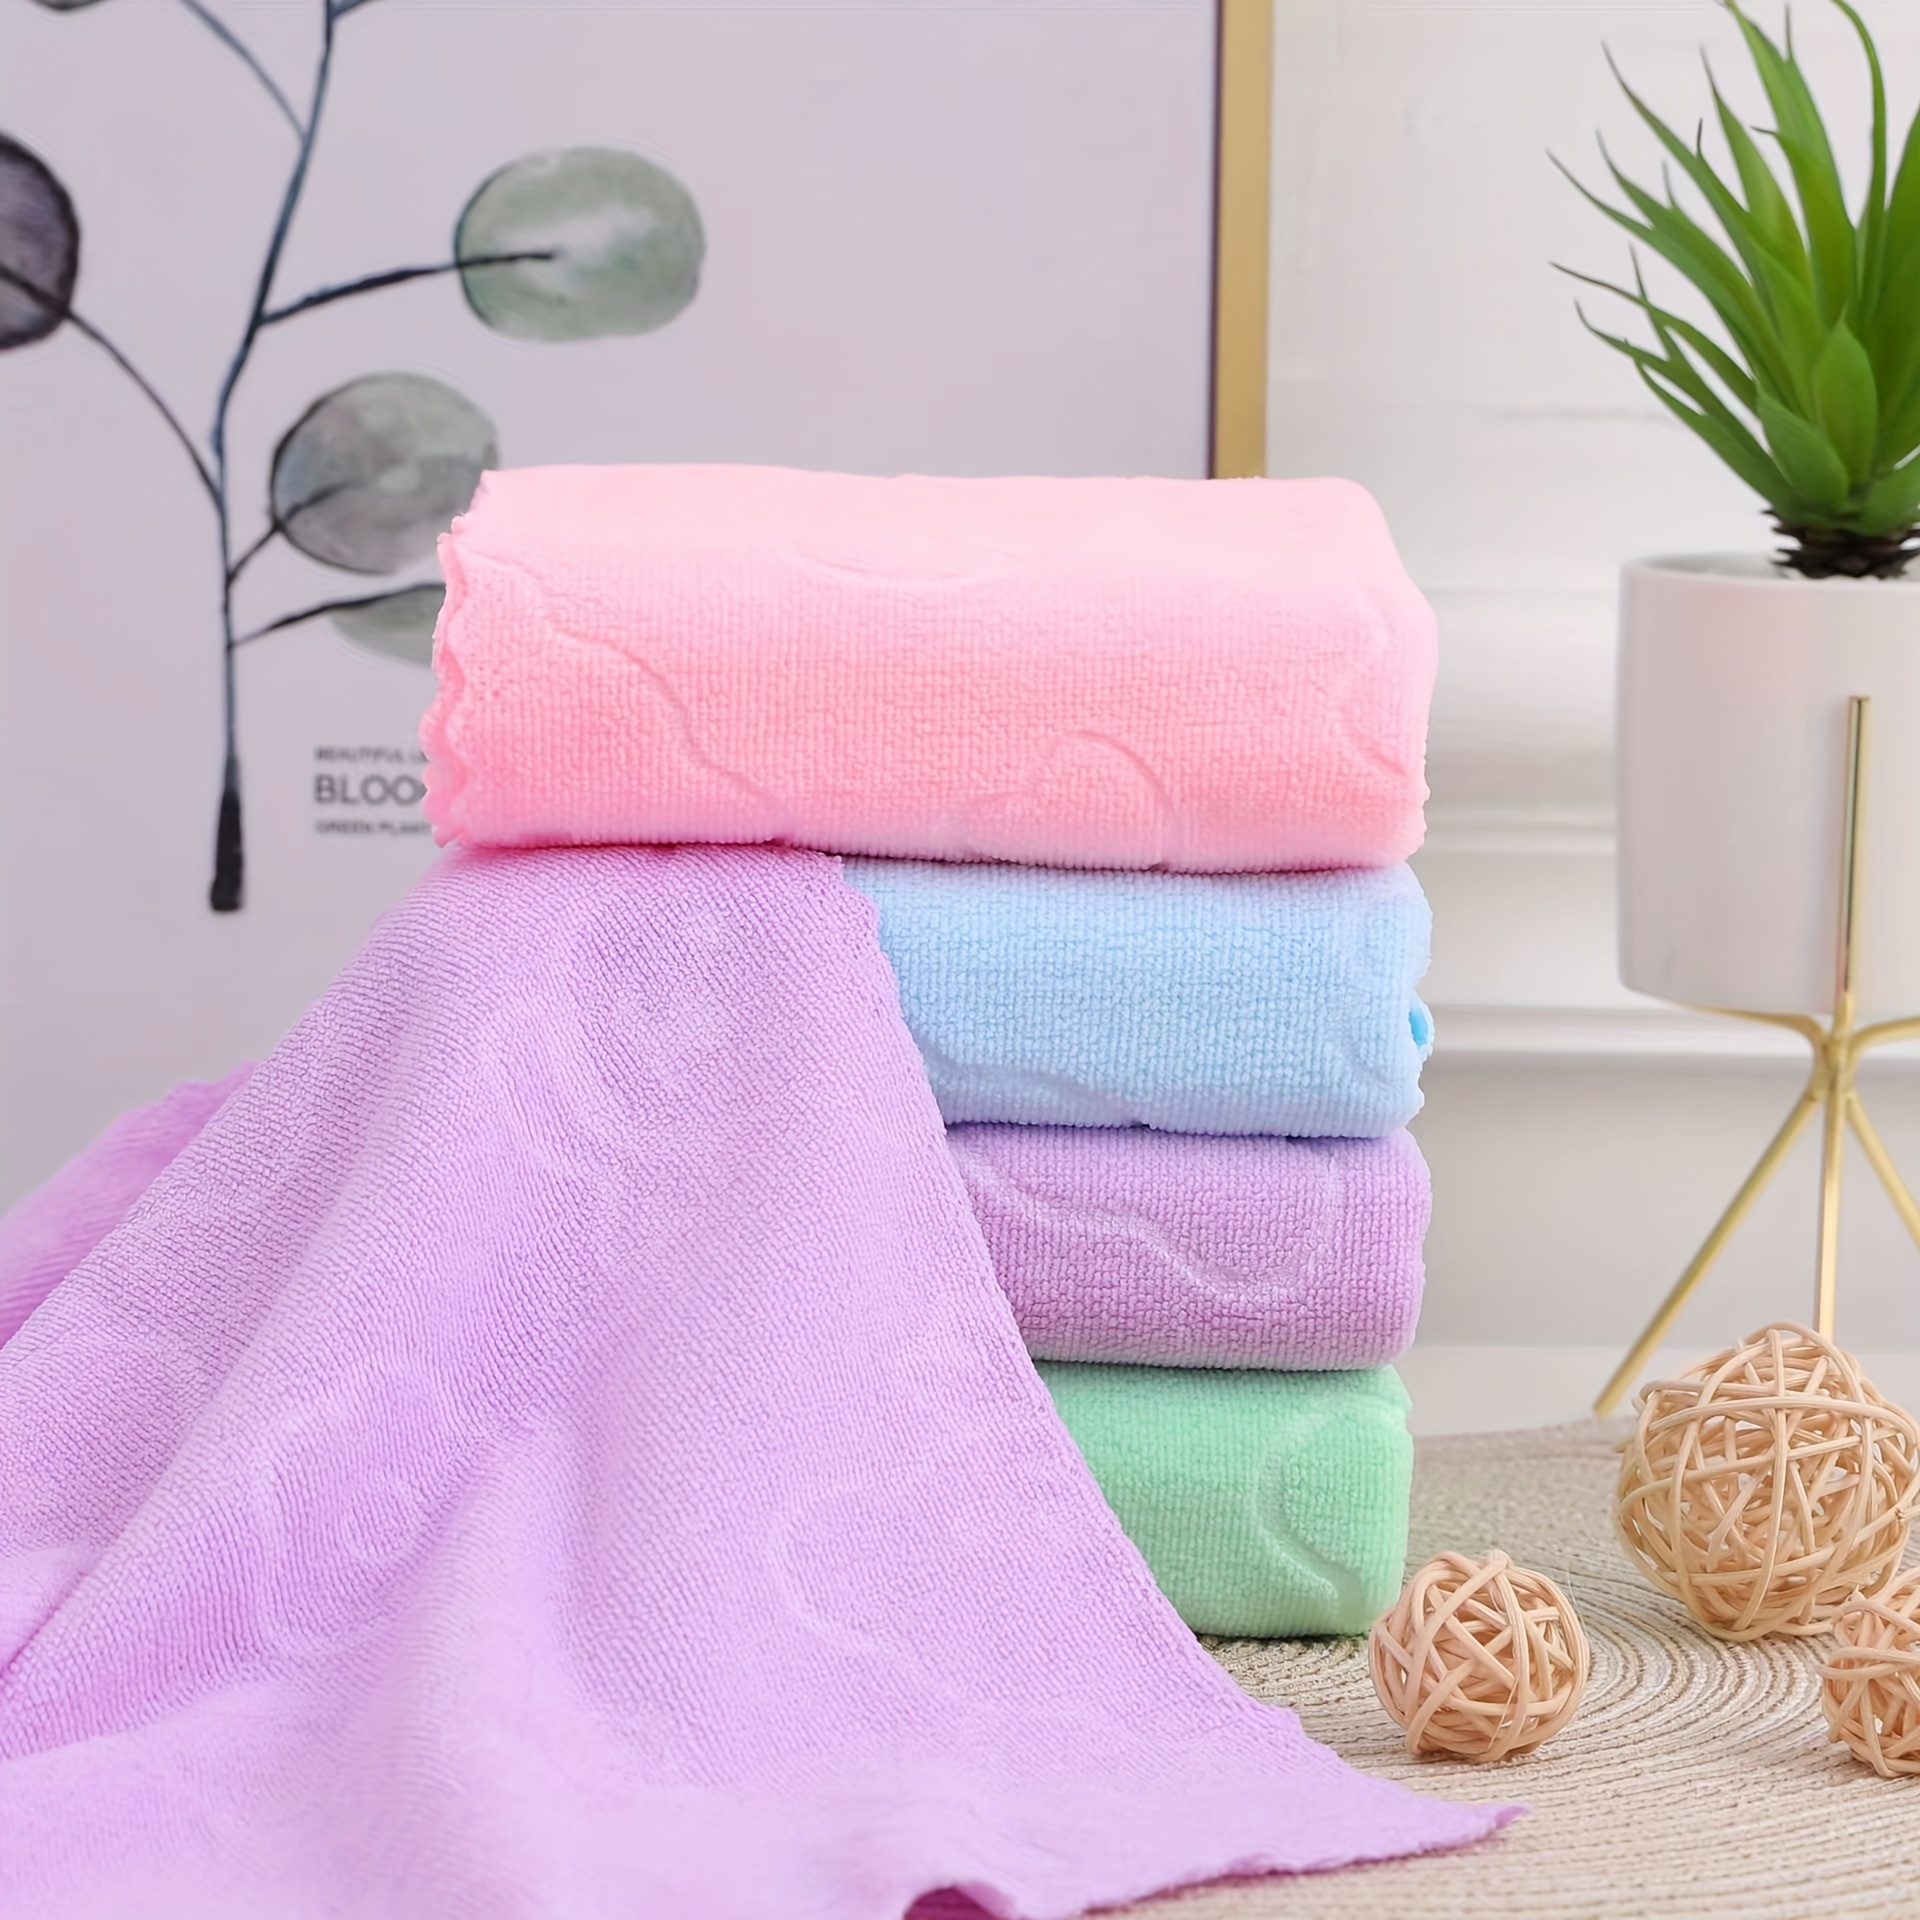 

5-piece Ultra-soft Microfiber Hand Towels - Colorful, Durable & Absorbent Face Towels For Bathroom Essentials